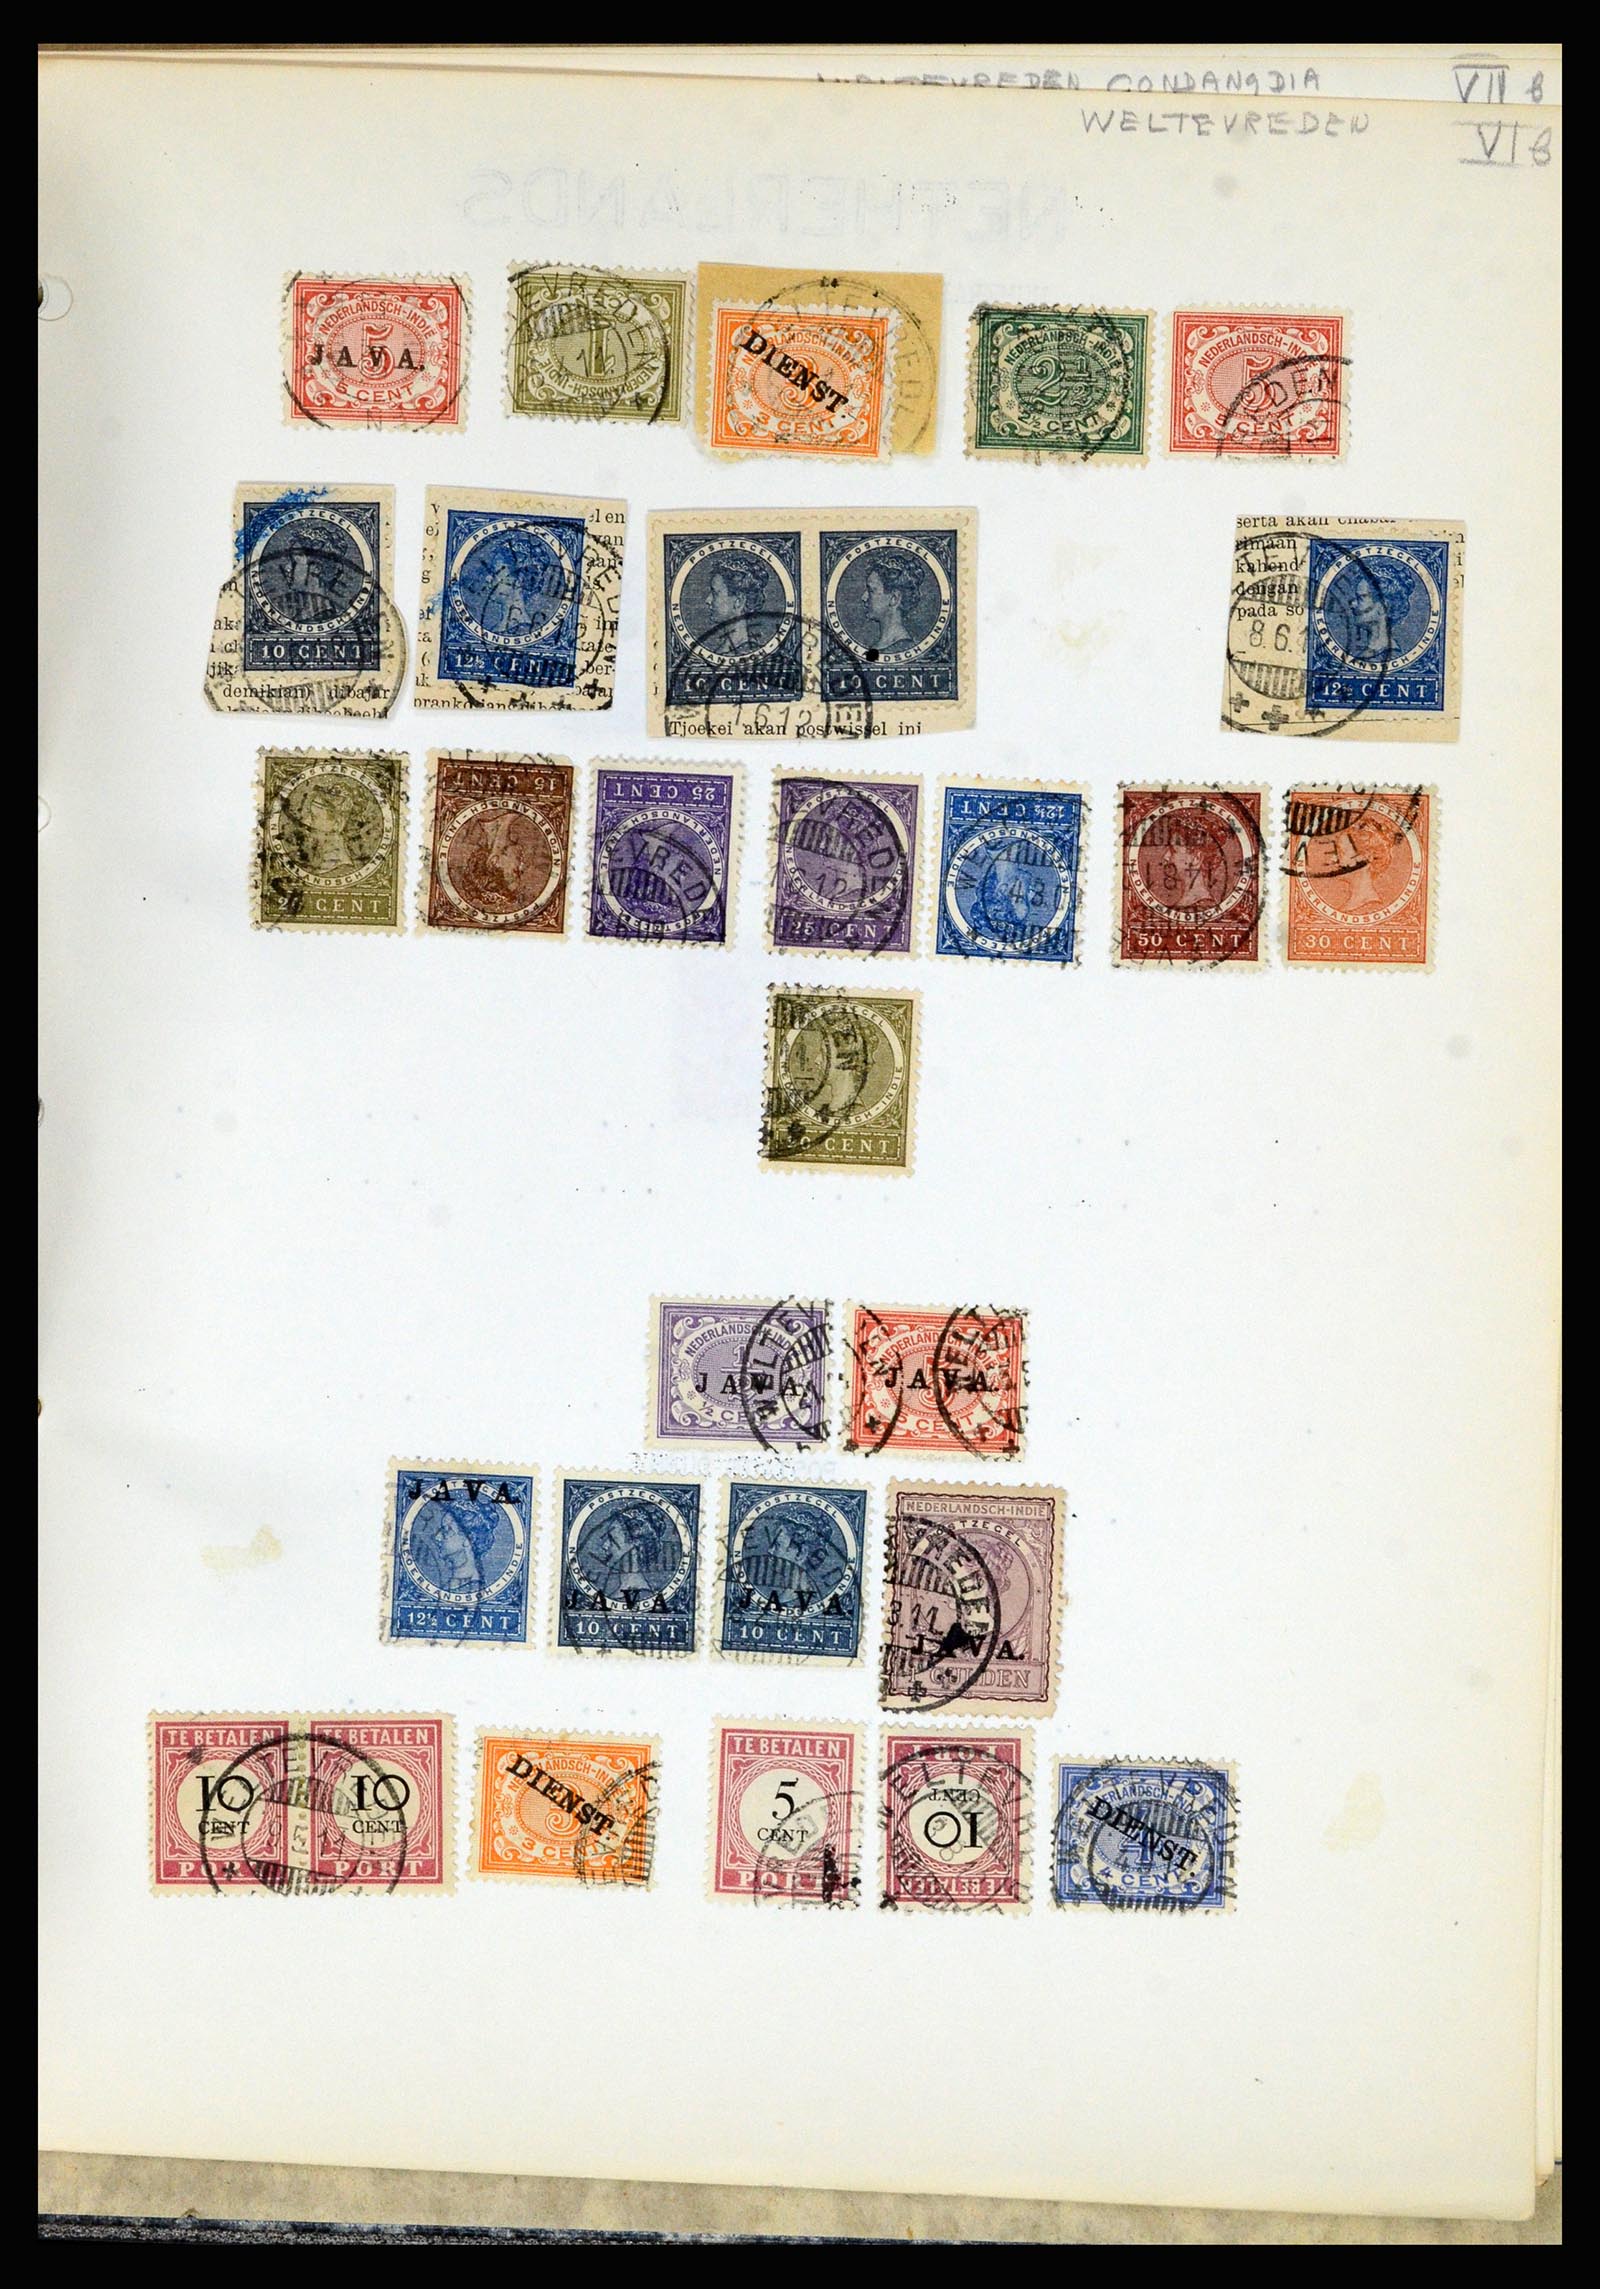 36841 189 - Stamp collection 36841 Dutch east Indies short bar cancels.